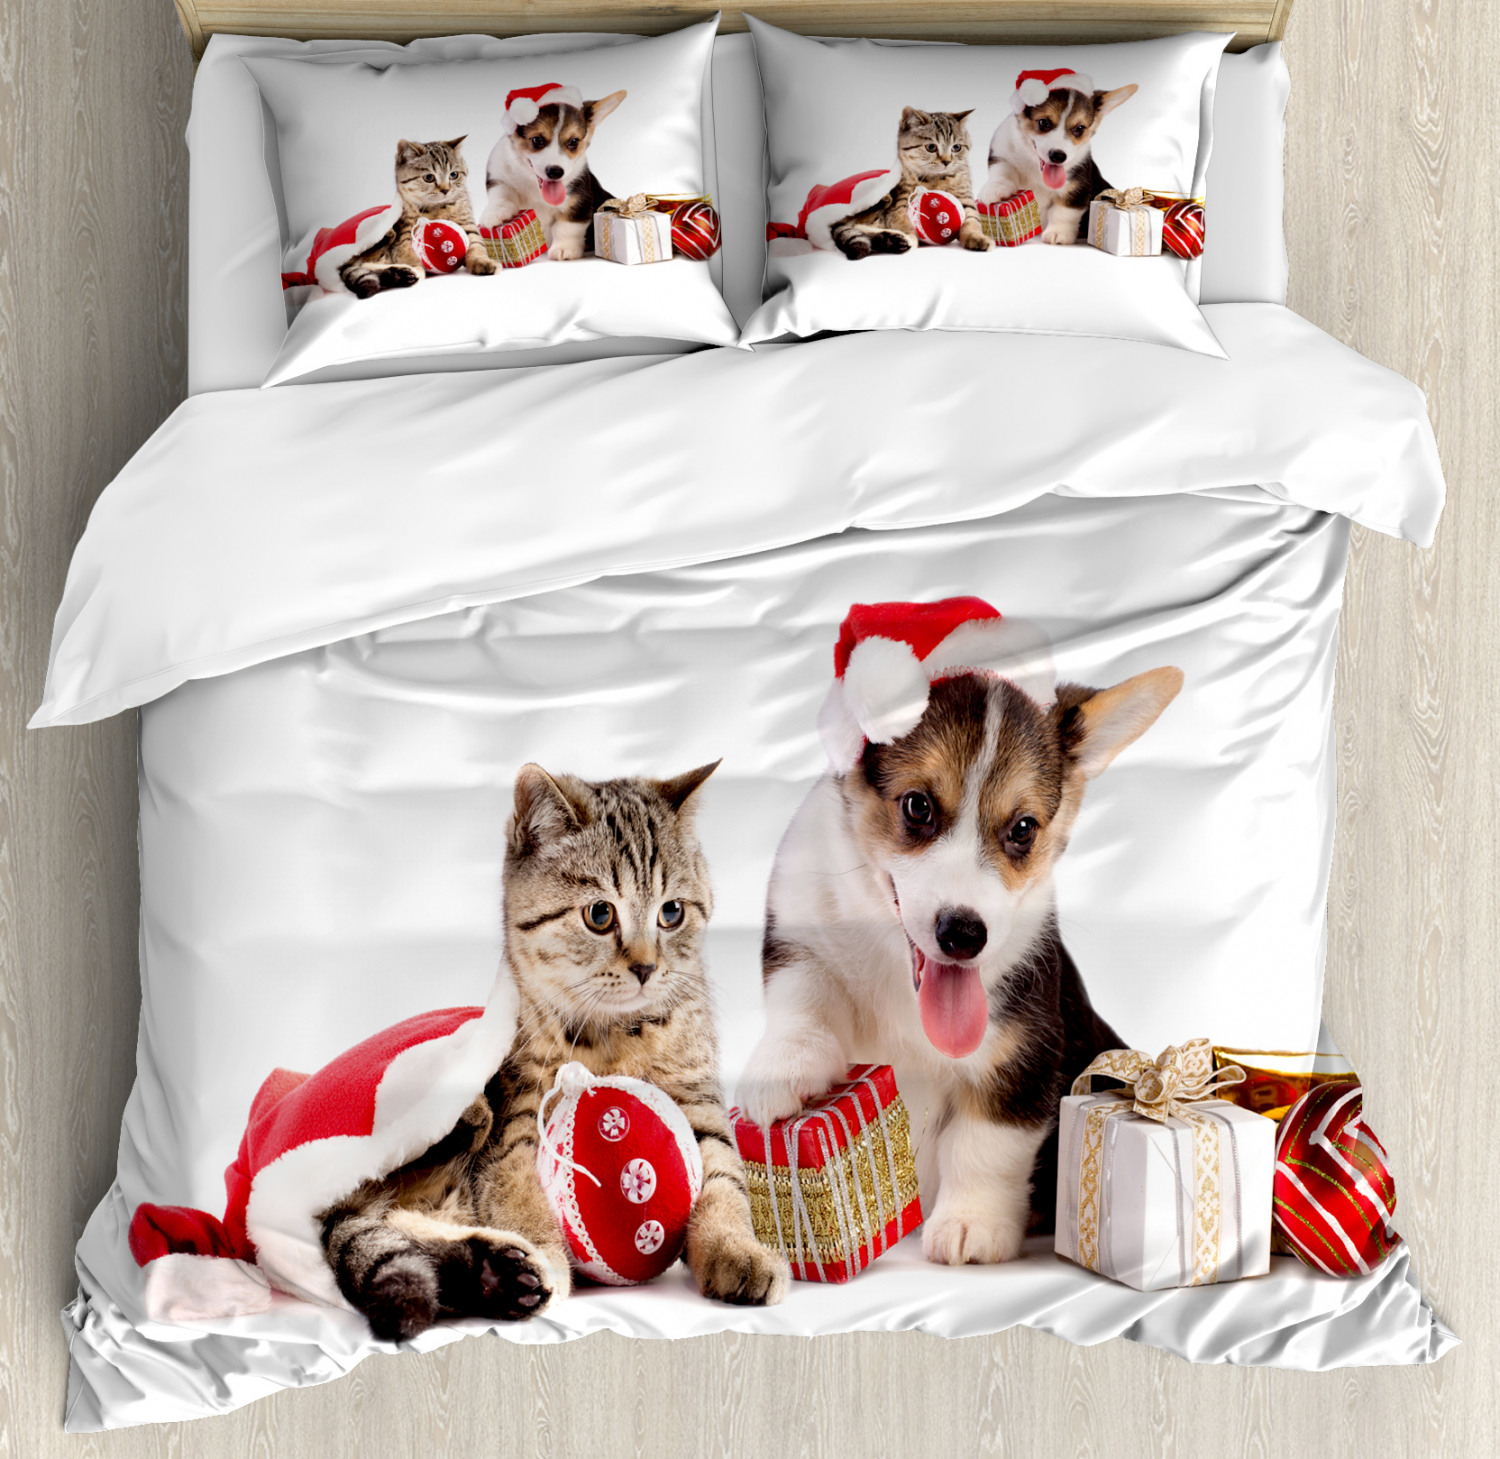 Christmas Duvet Cover Set With Pillow Shams Dog Cat With Presents